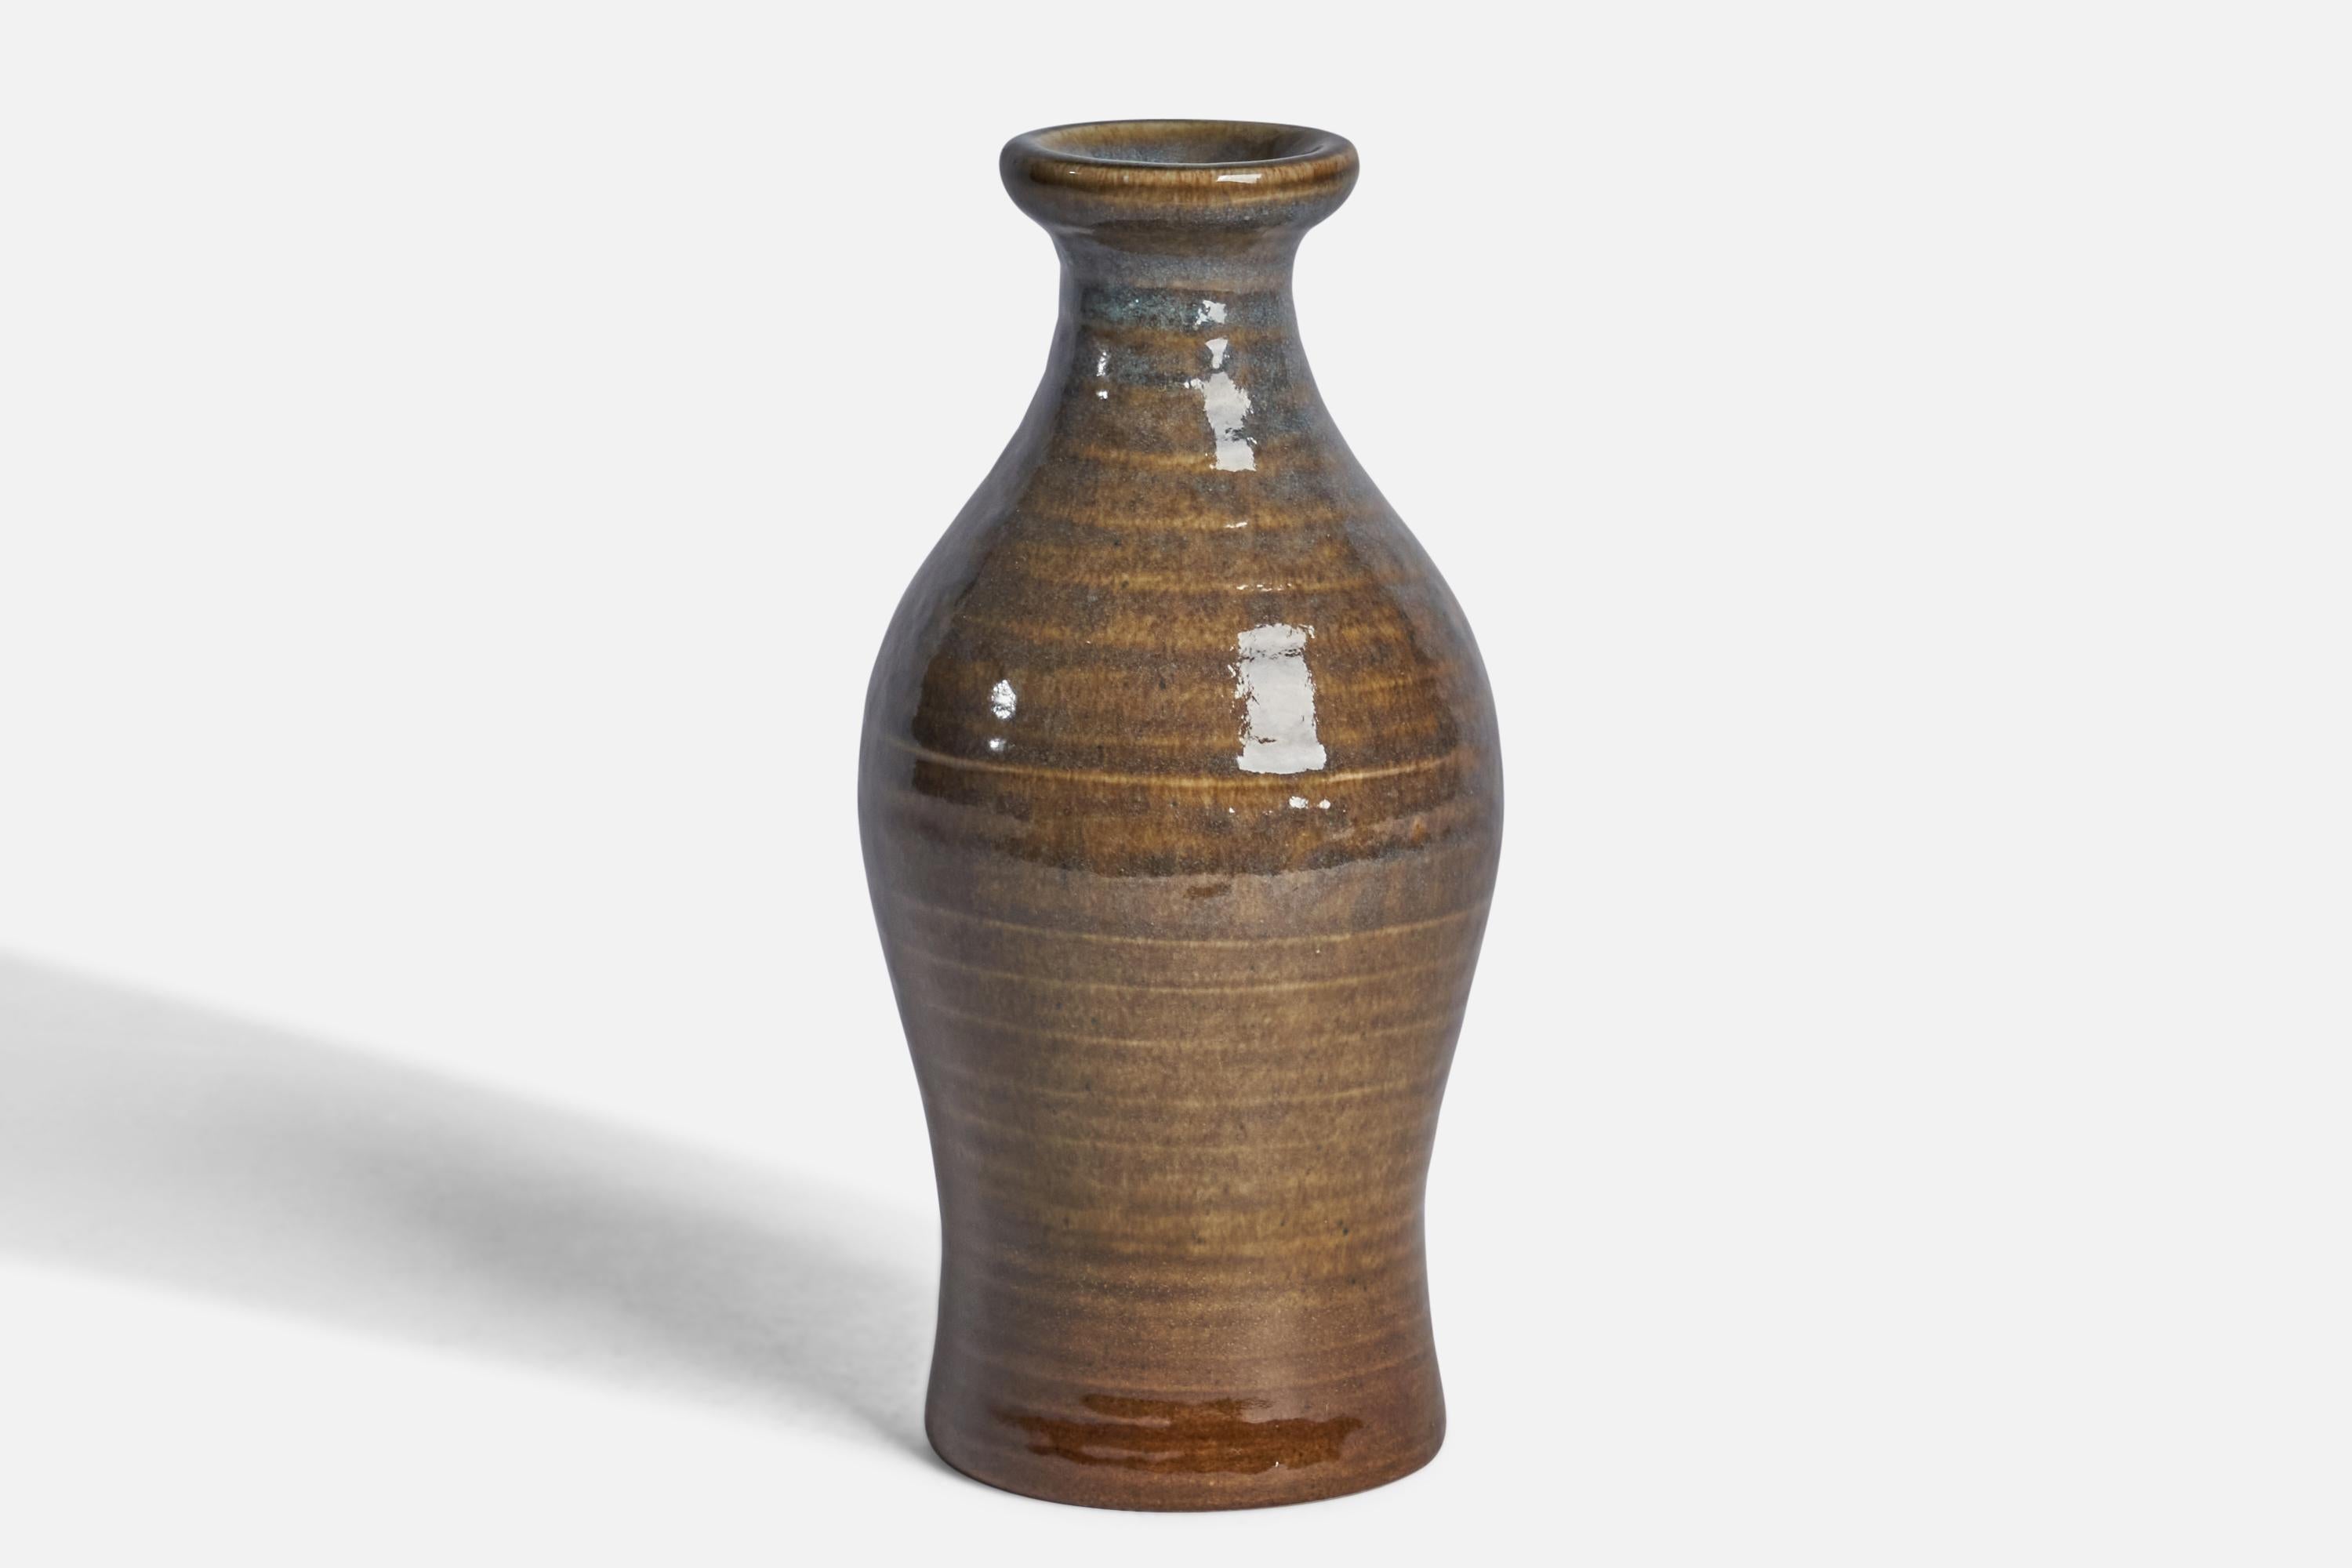 A brown-glazed stoneware vase designed by Carl-Harry Stålhane and produced by Rörstrand, Sweden, 1950s.